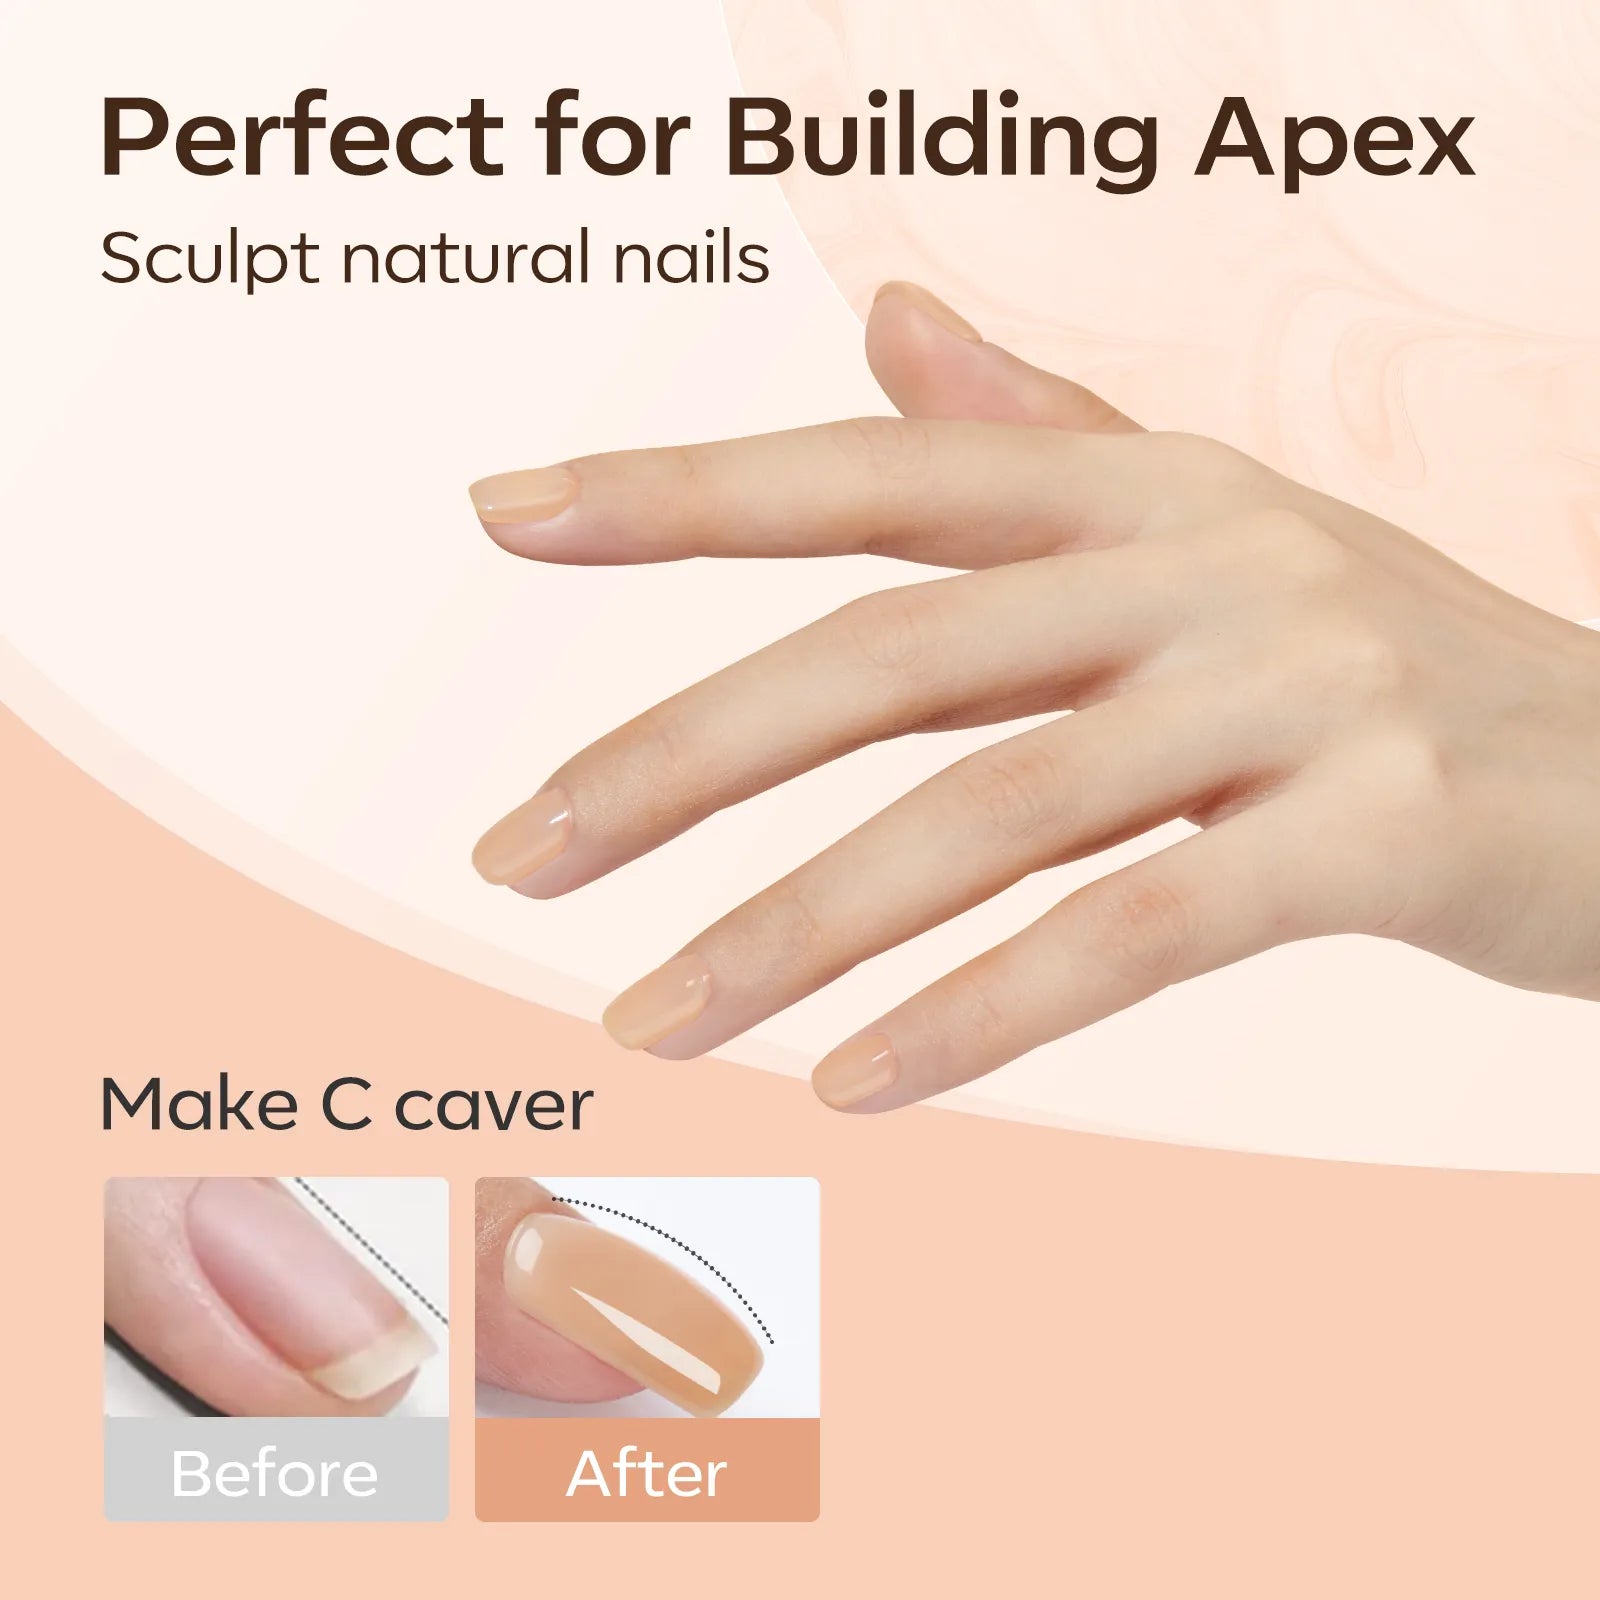 Breathable Skin Tone - 6 Colors 8-in-1 Builder Nail Gel Set 7ml【US/AU/EU ONLY】